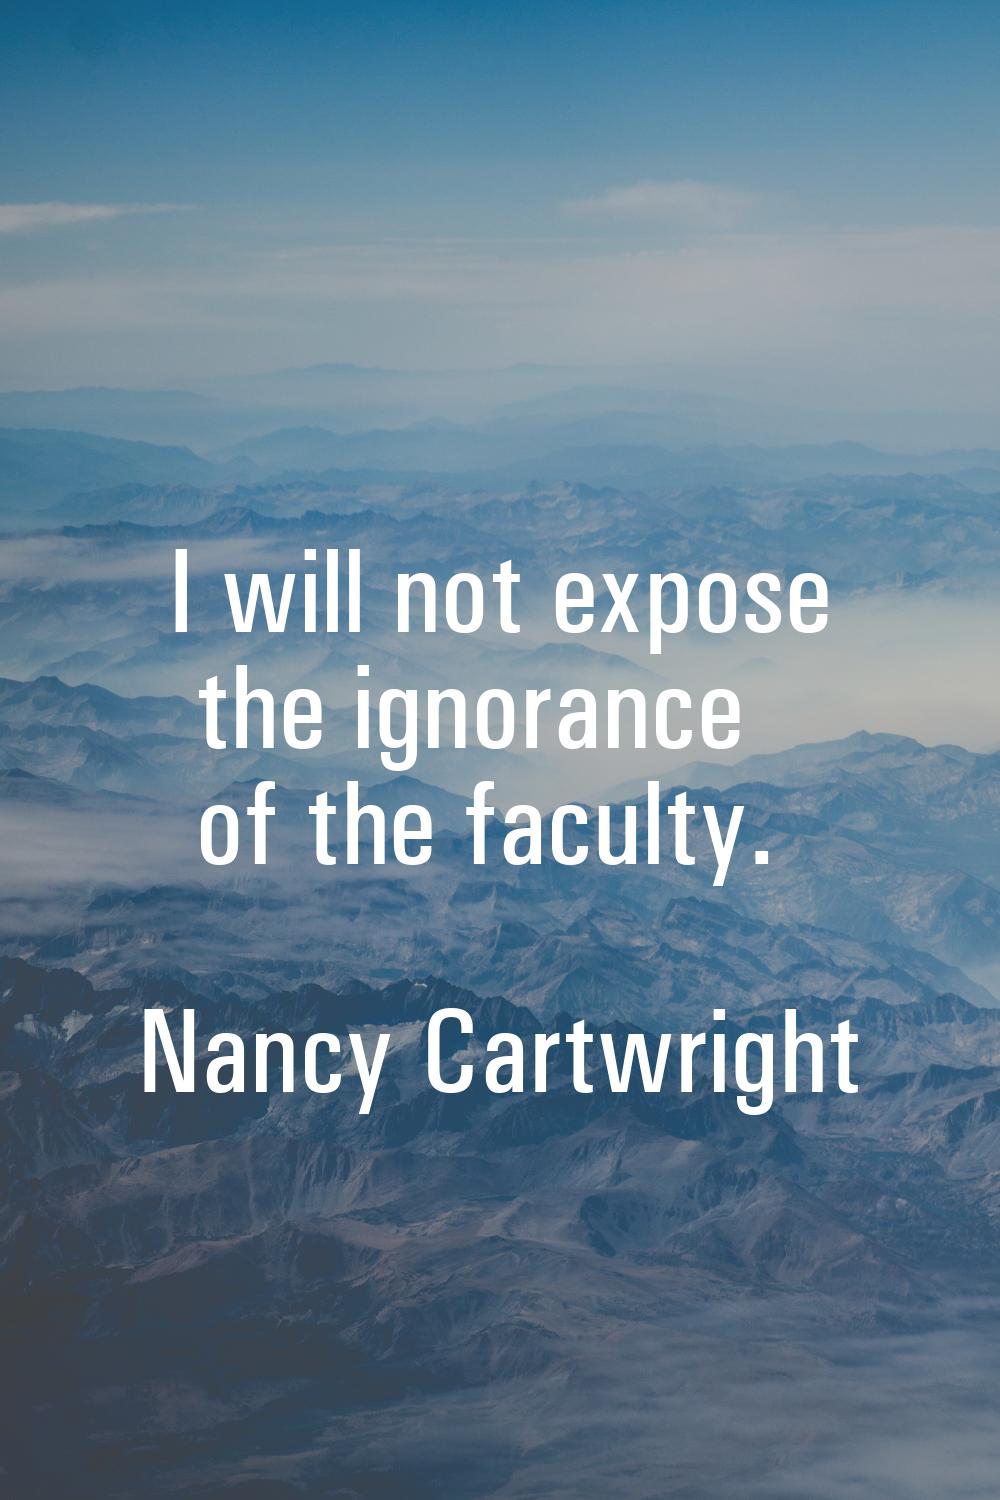 I will not expose the ignorance of the faculty.